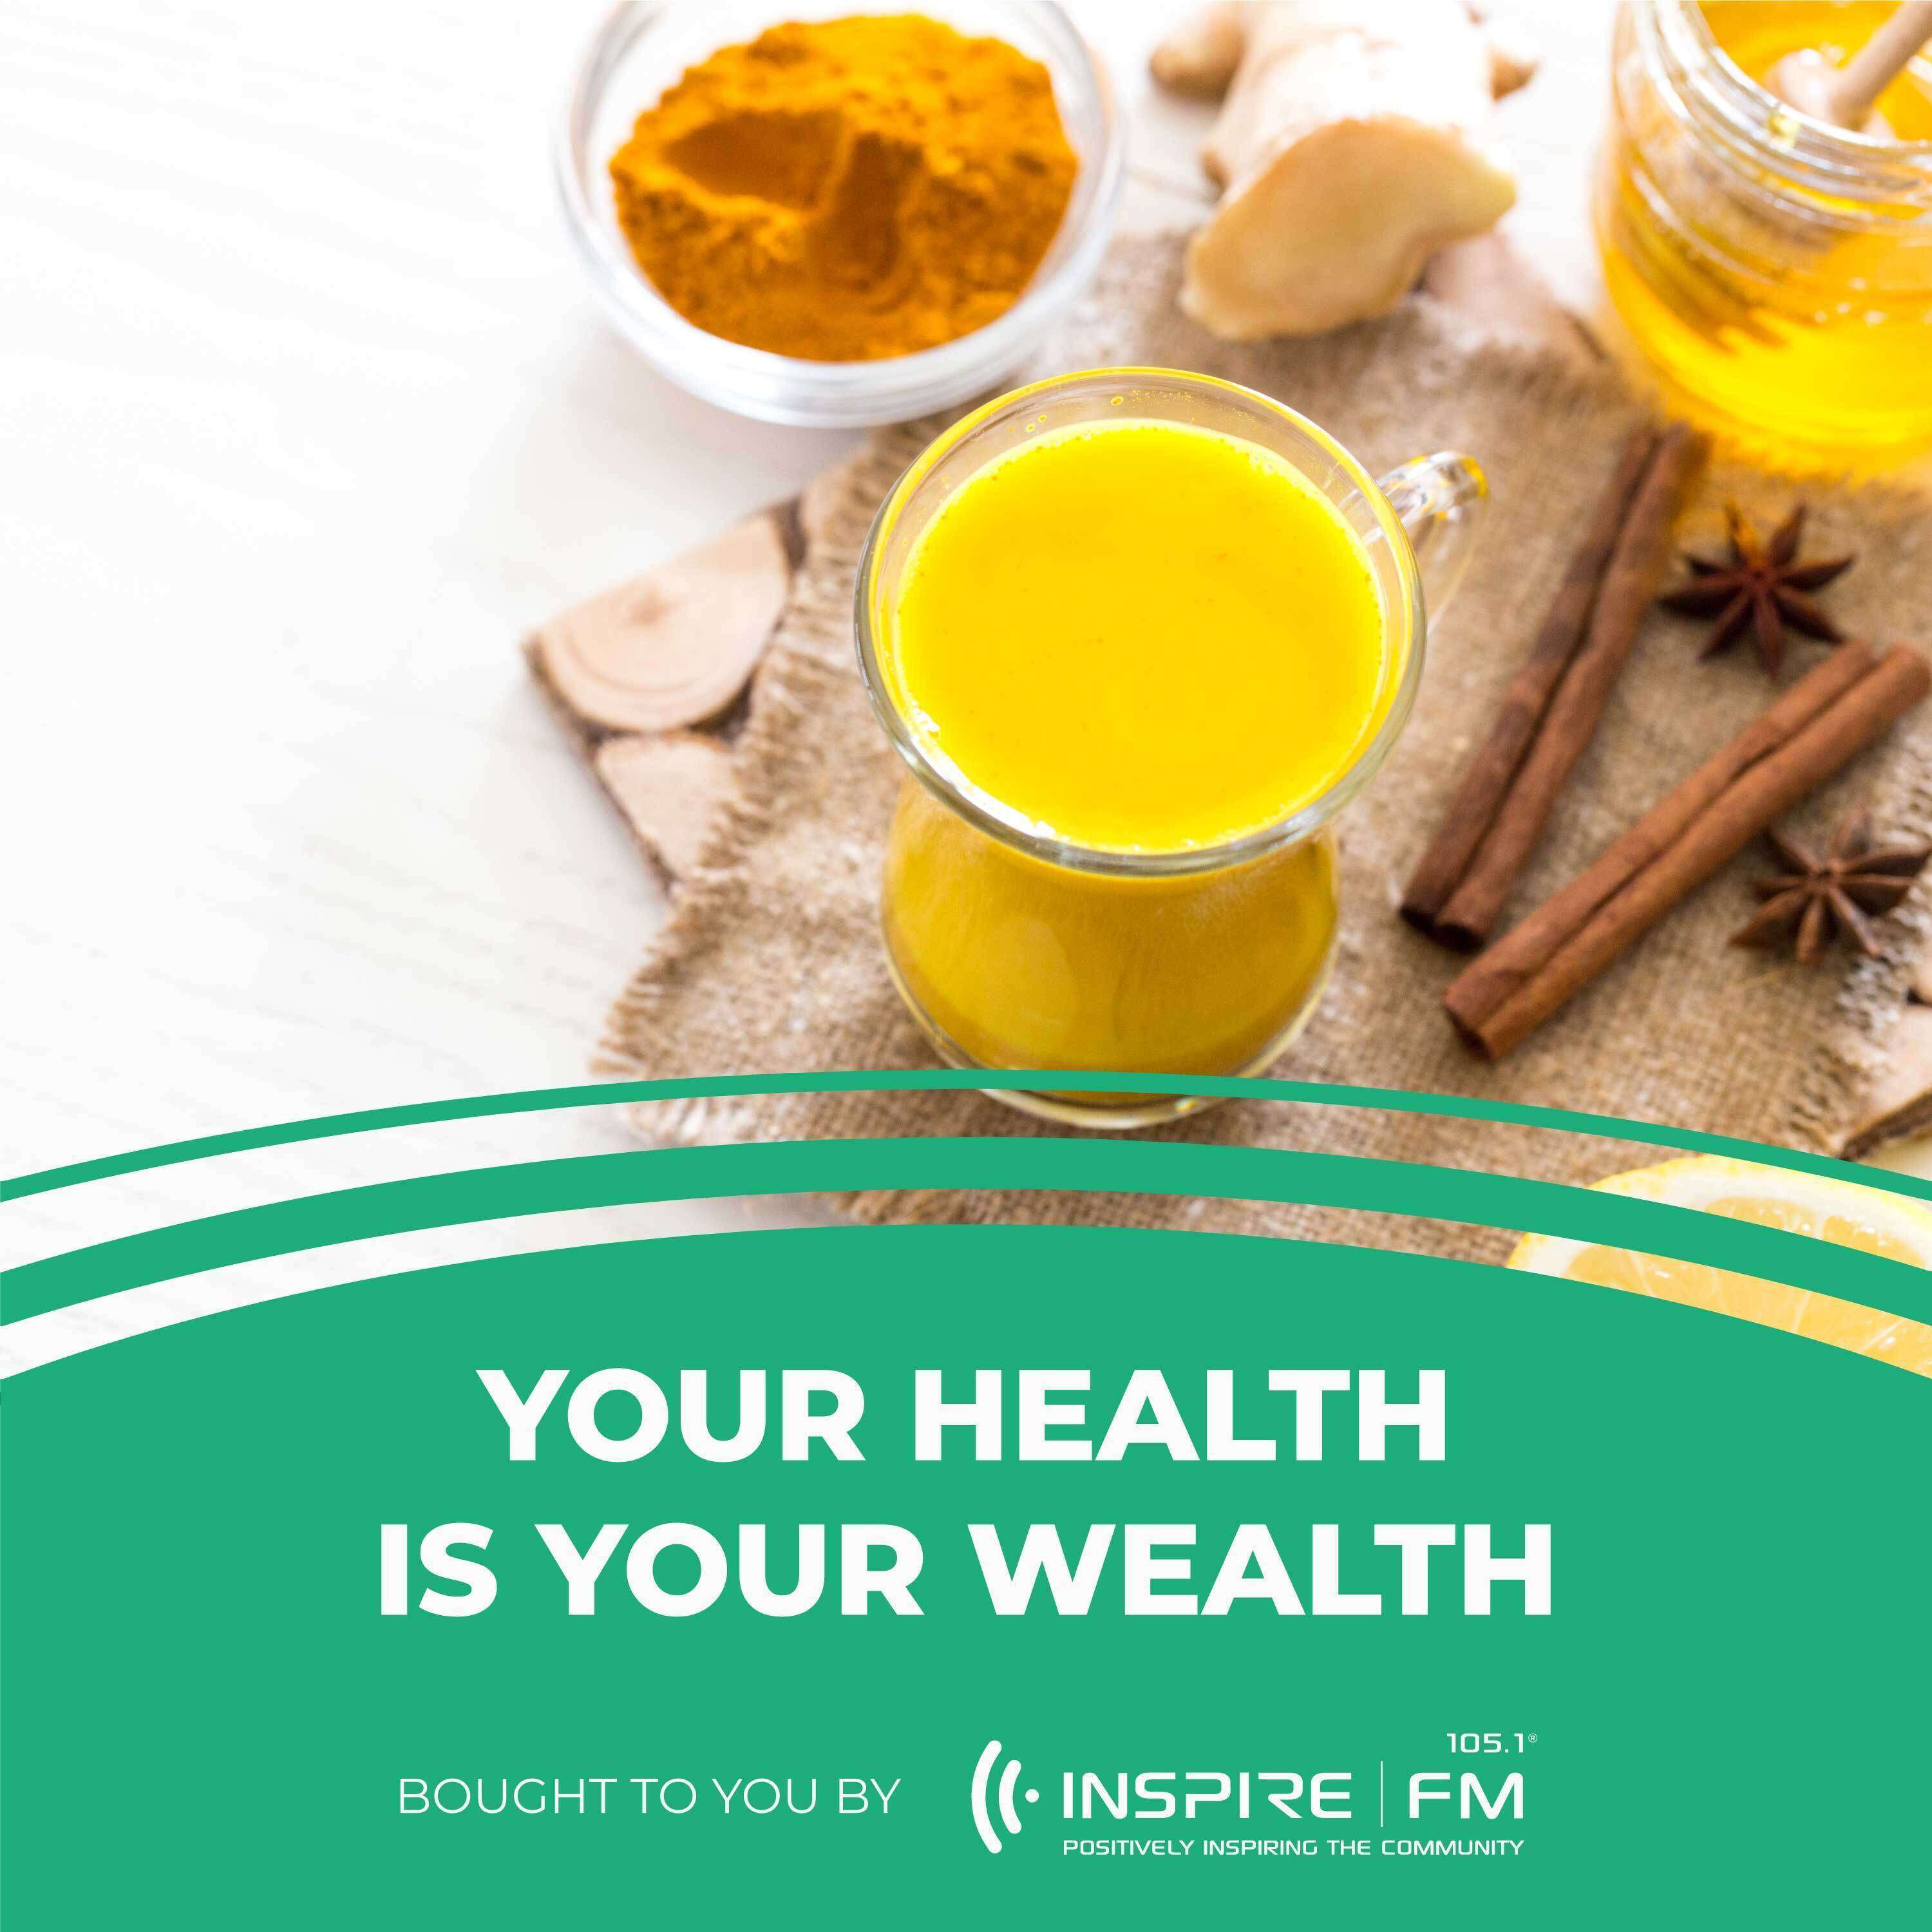 Your Health is Your Wealth